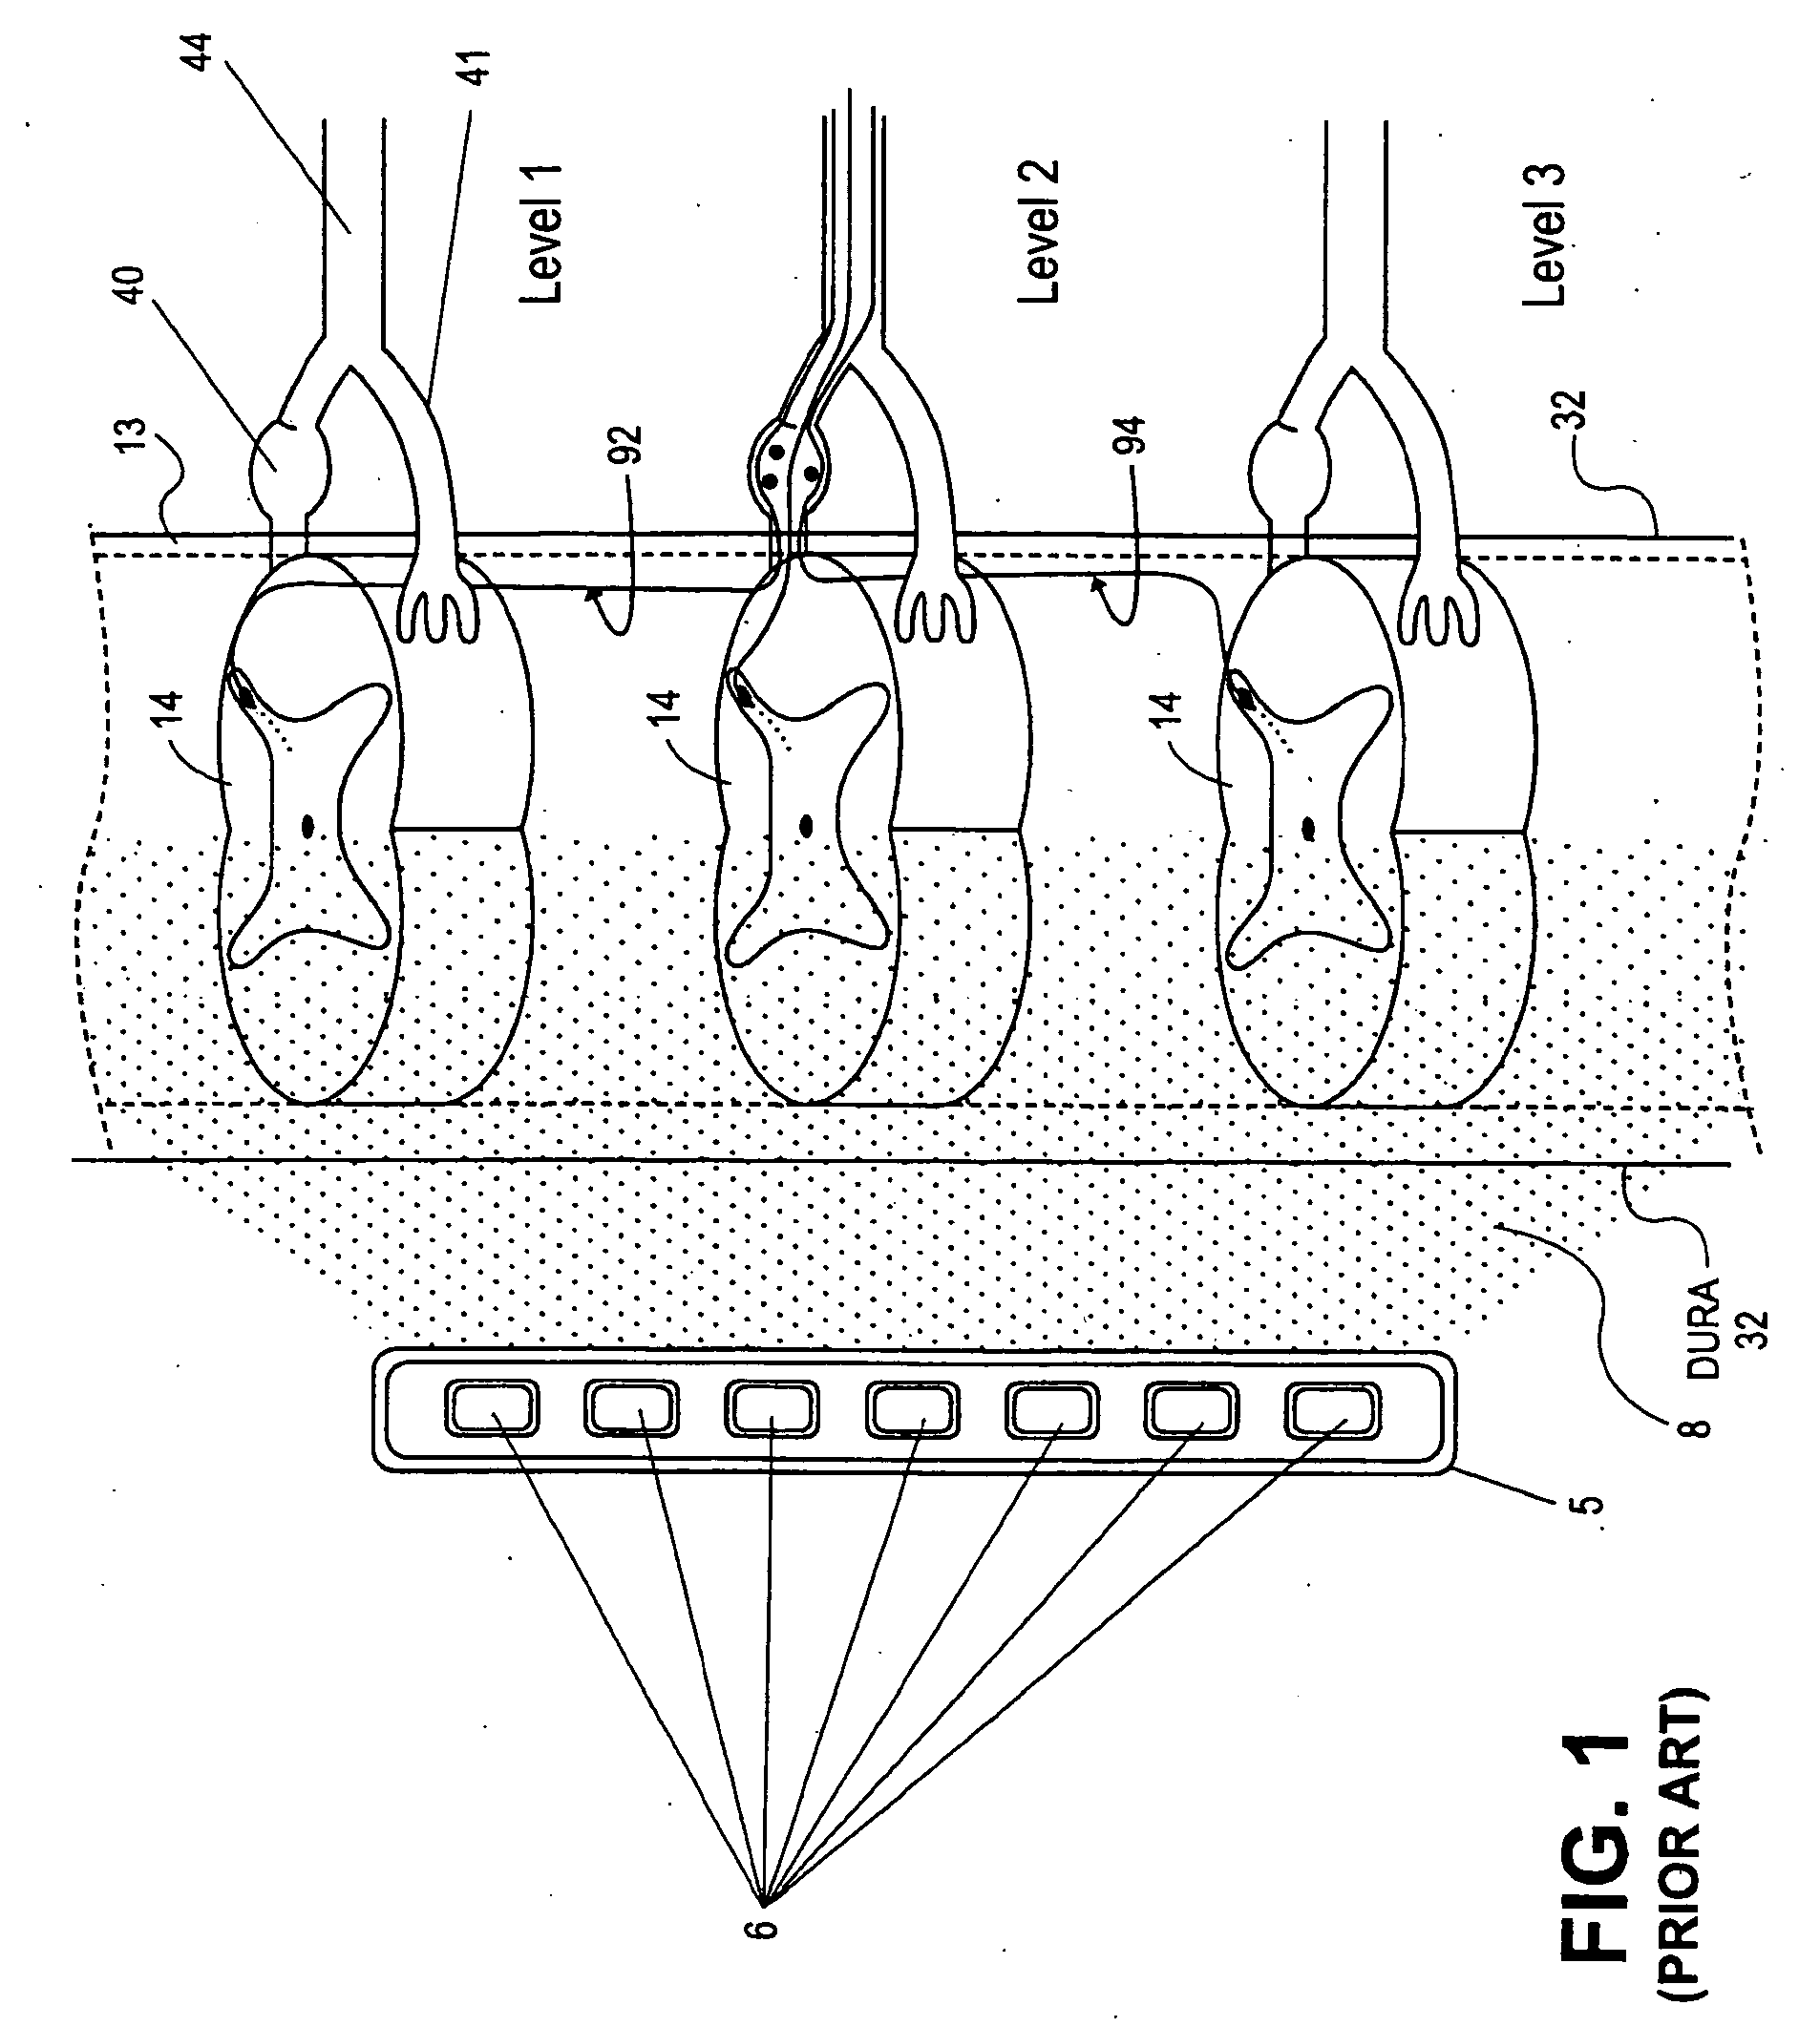 Pulse generator for high impedance electrodes